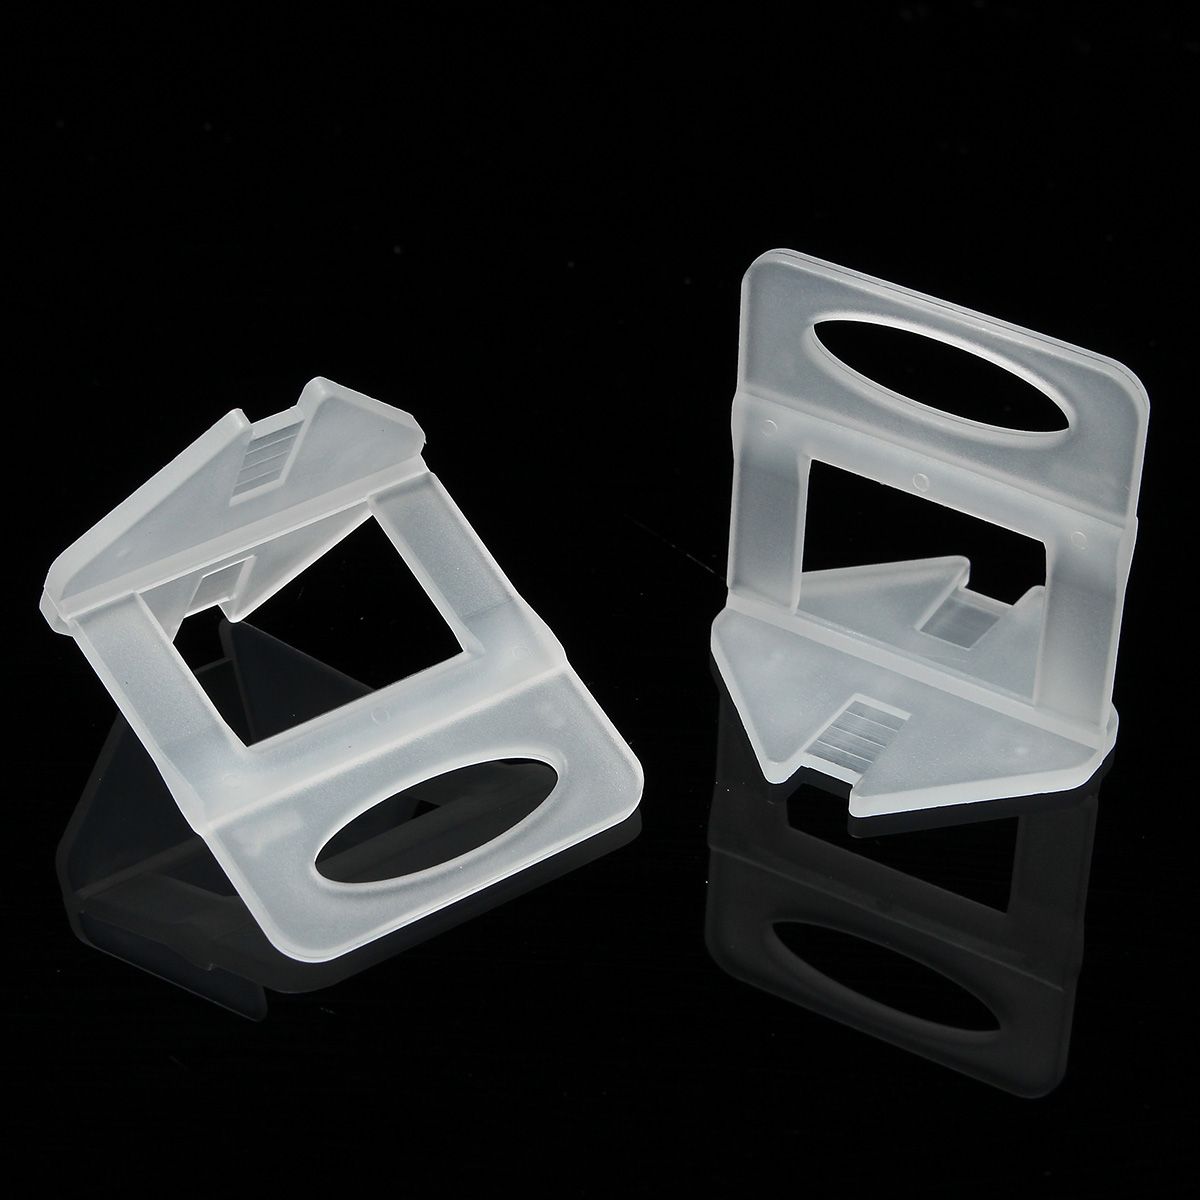 100Pcs-2mm-Tile-Leveling-System-Spacers-Plastic-For-Home-Floor-1161713